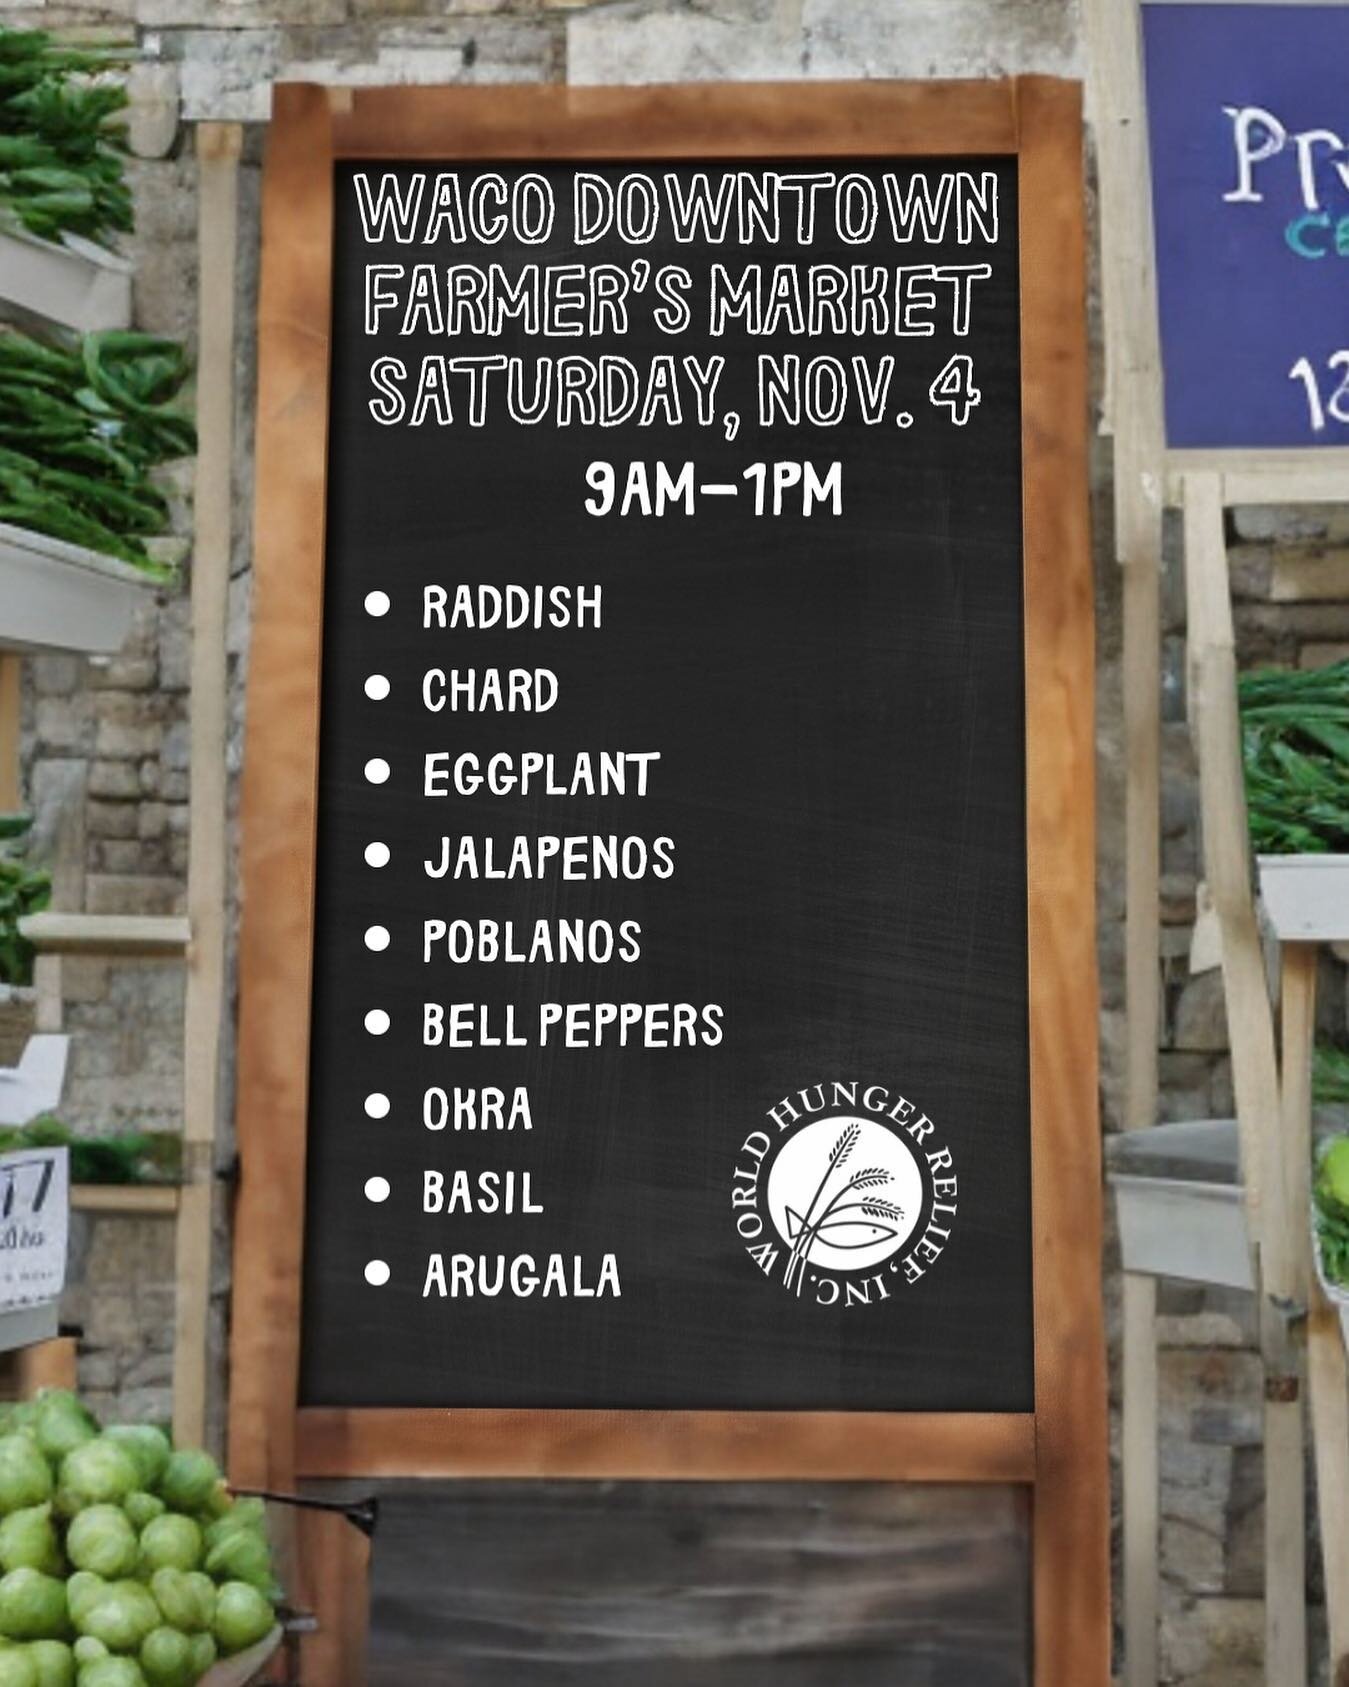 Here is what to expect at Market this Saturday!! See you there!